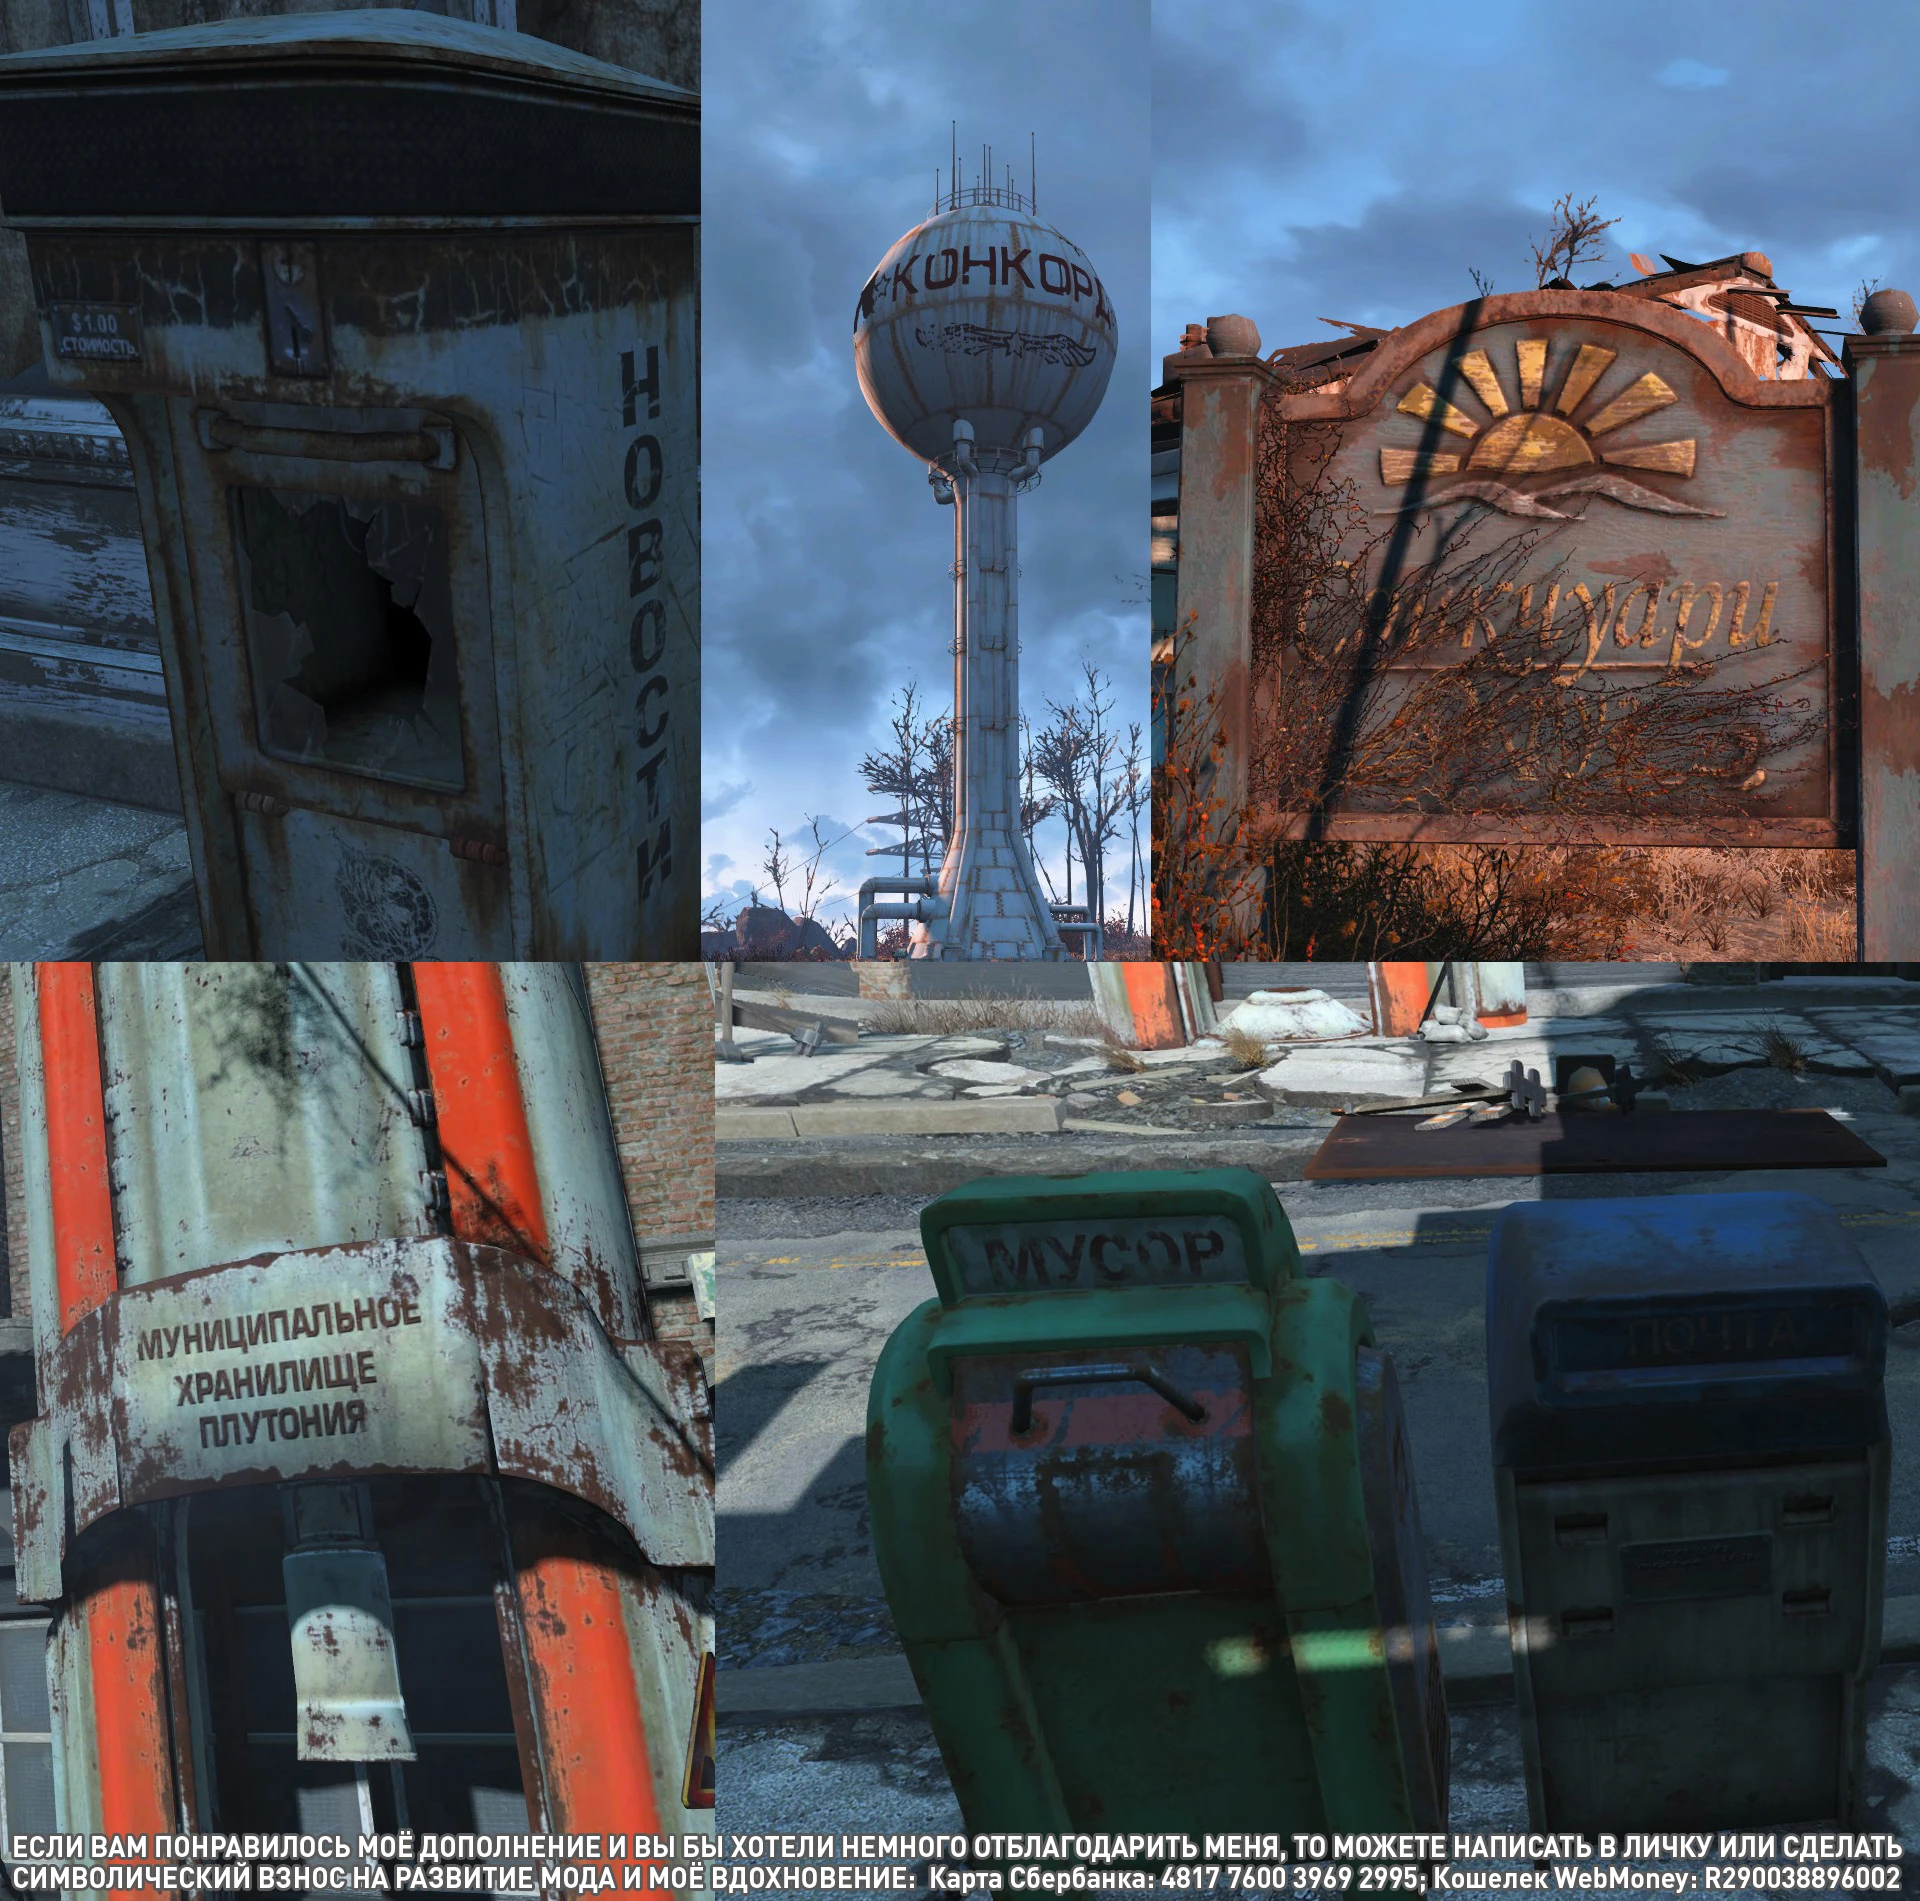 Generator textures from hiro fallout 4 фото 21